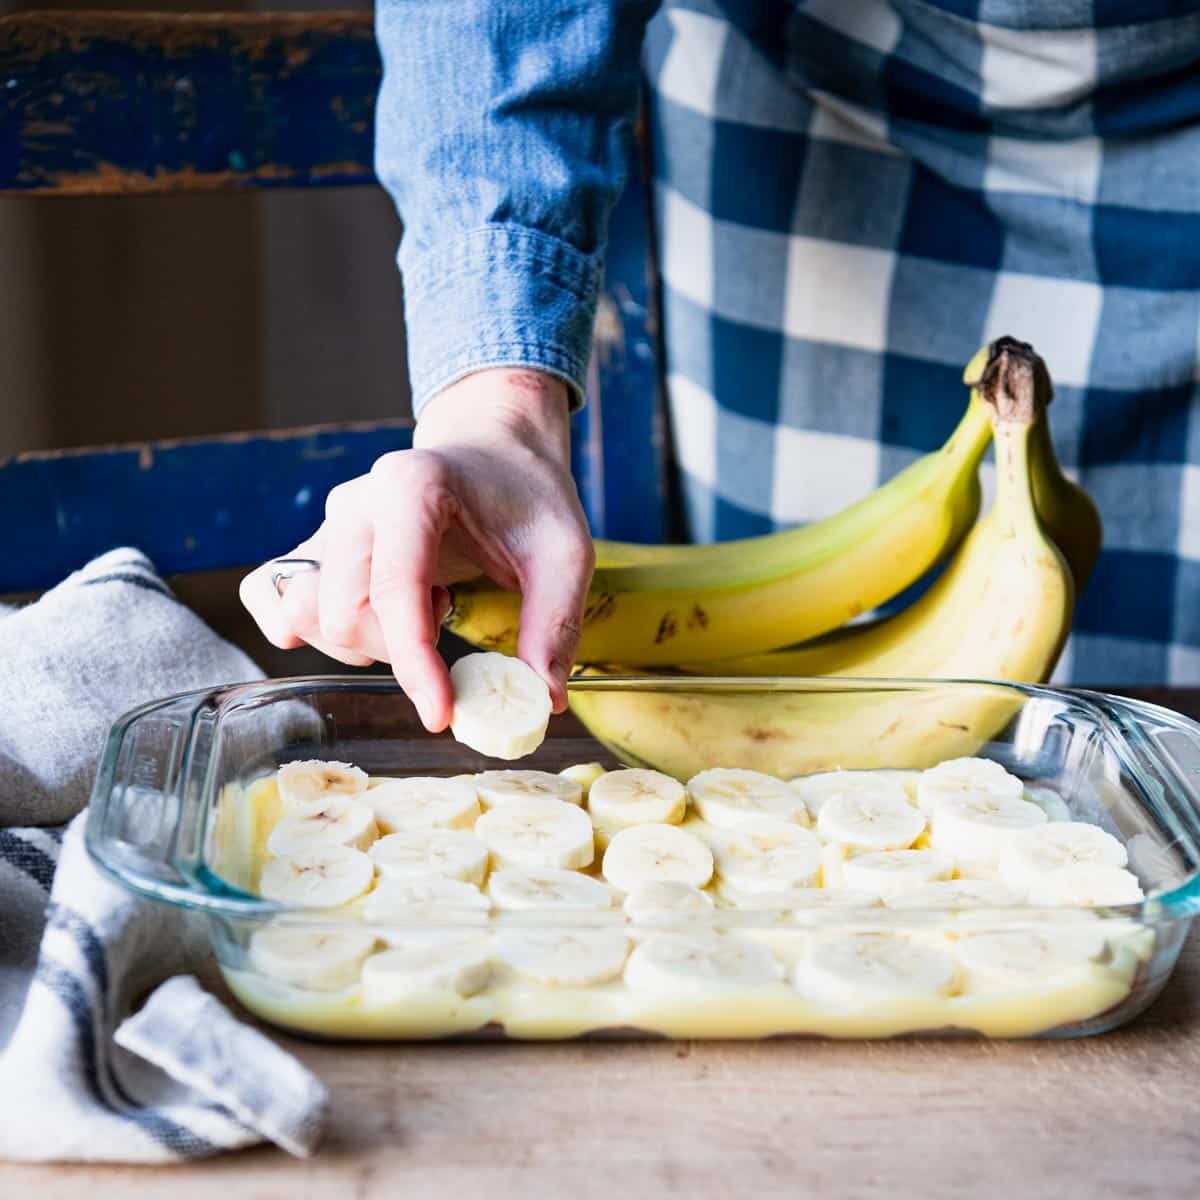 Arranging bananas in a glass dish.